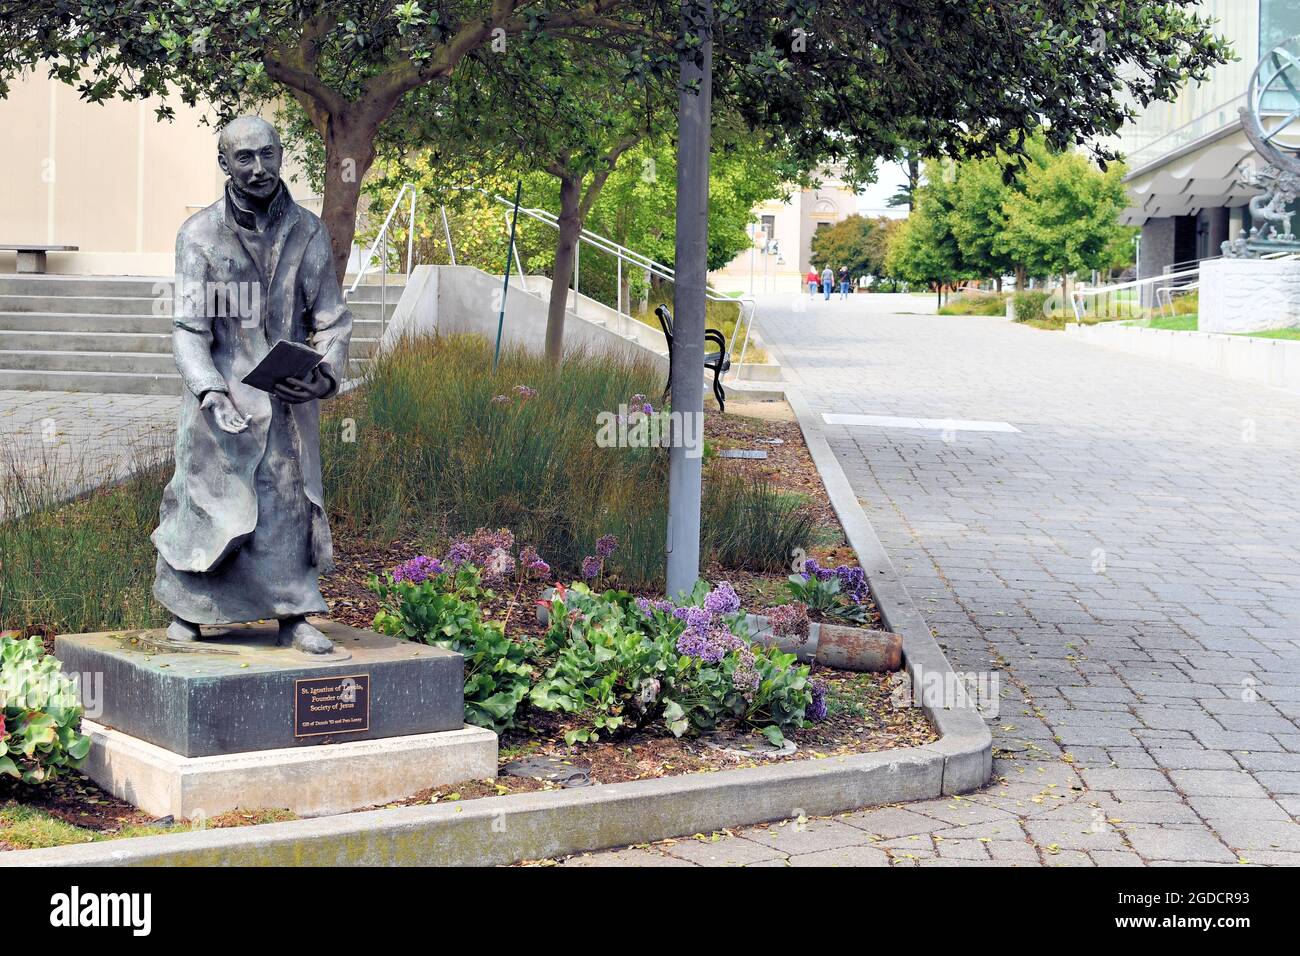 Bronze statue of St. Ignatius Loyola, founder of the Society of Jesus, on the campus of the University of San Francisco; San Francisco, California. Stock Photo